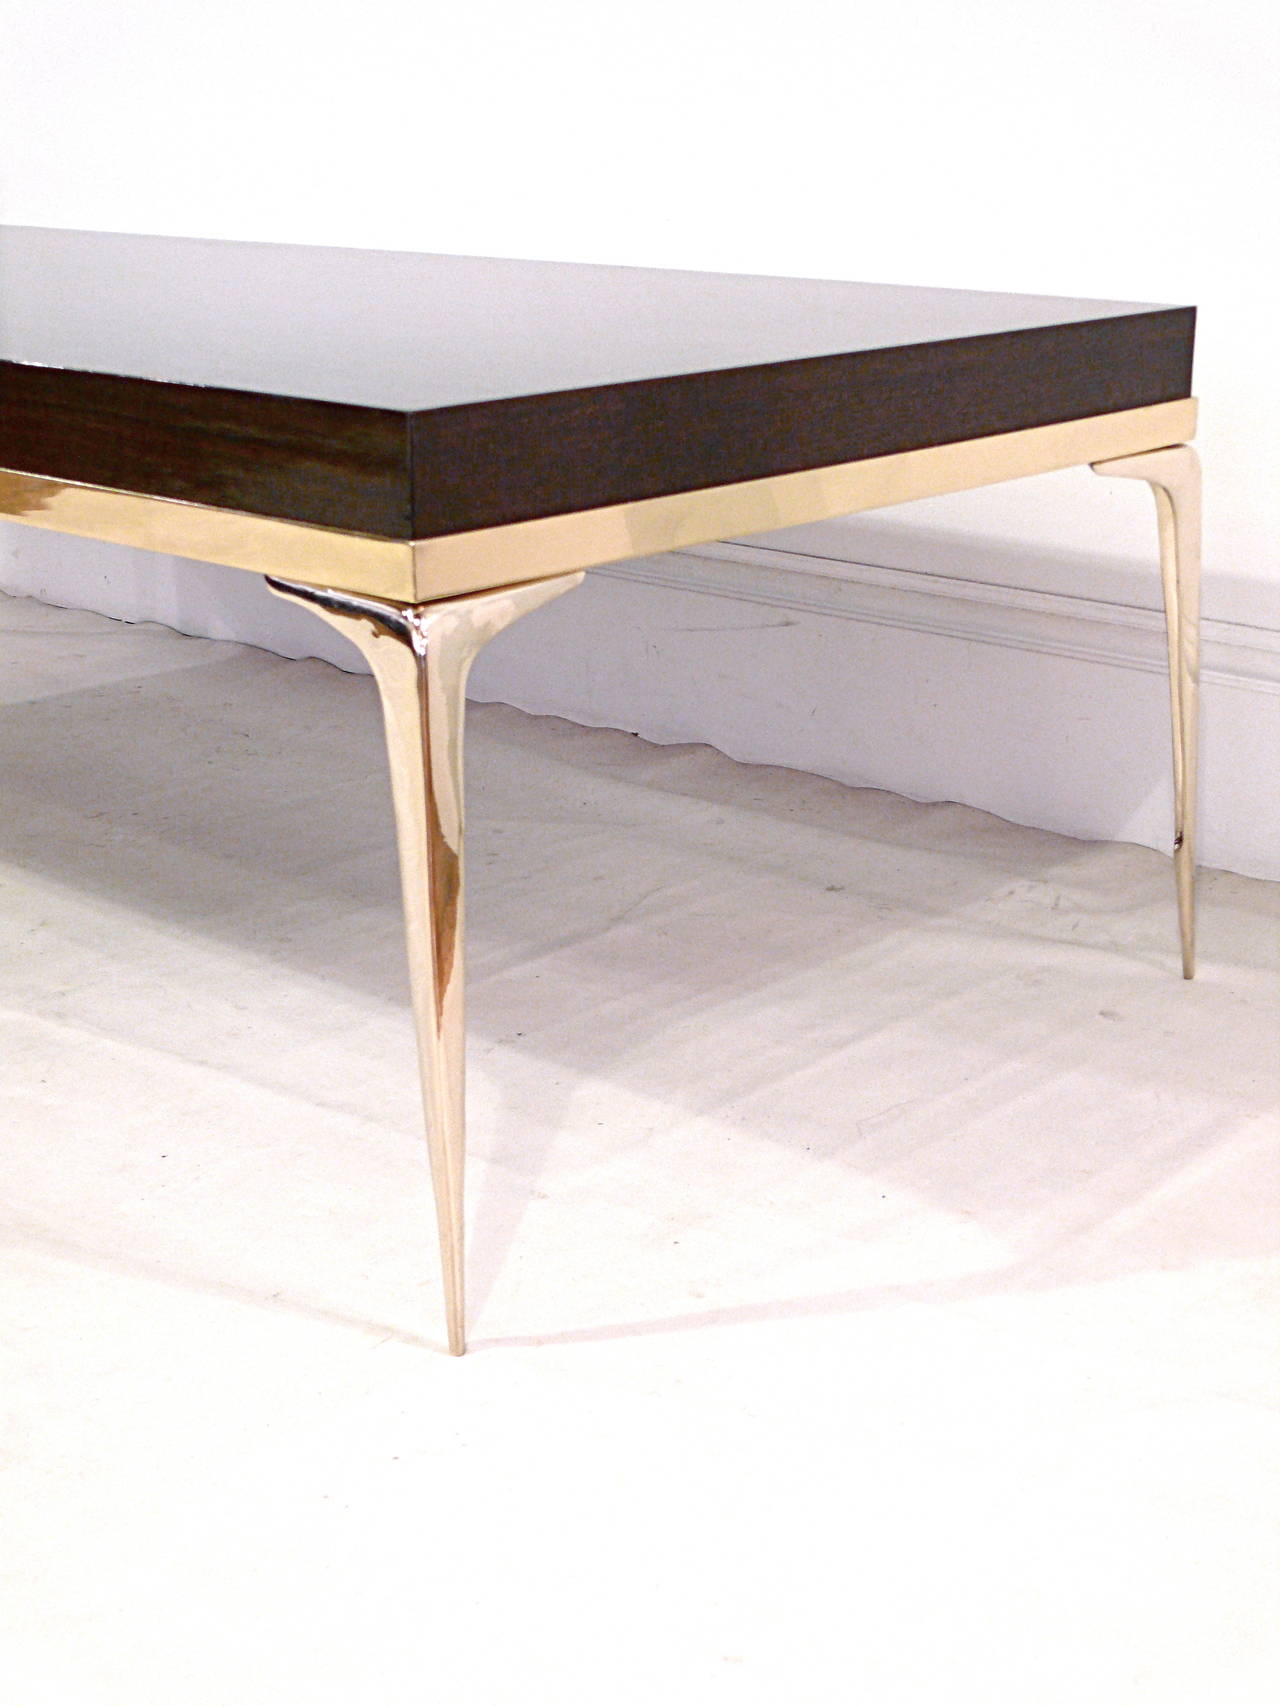 Polished CF MODERN Custom Brass Banded Stiletto Coffee or Cocktail Table For Sale